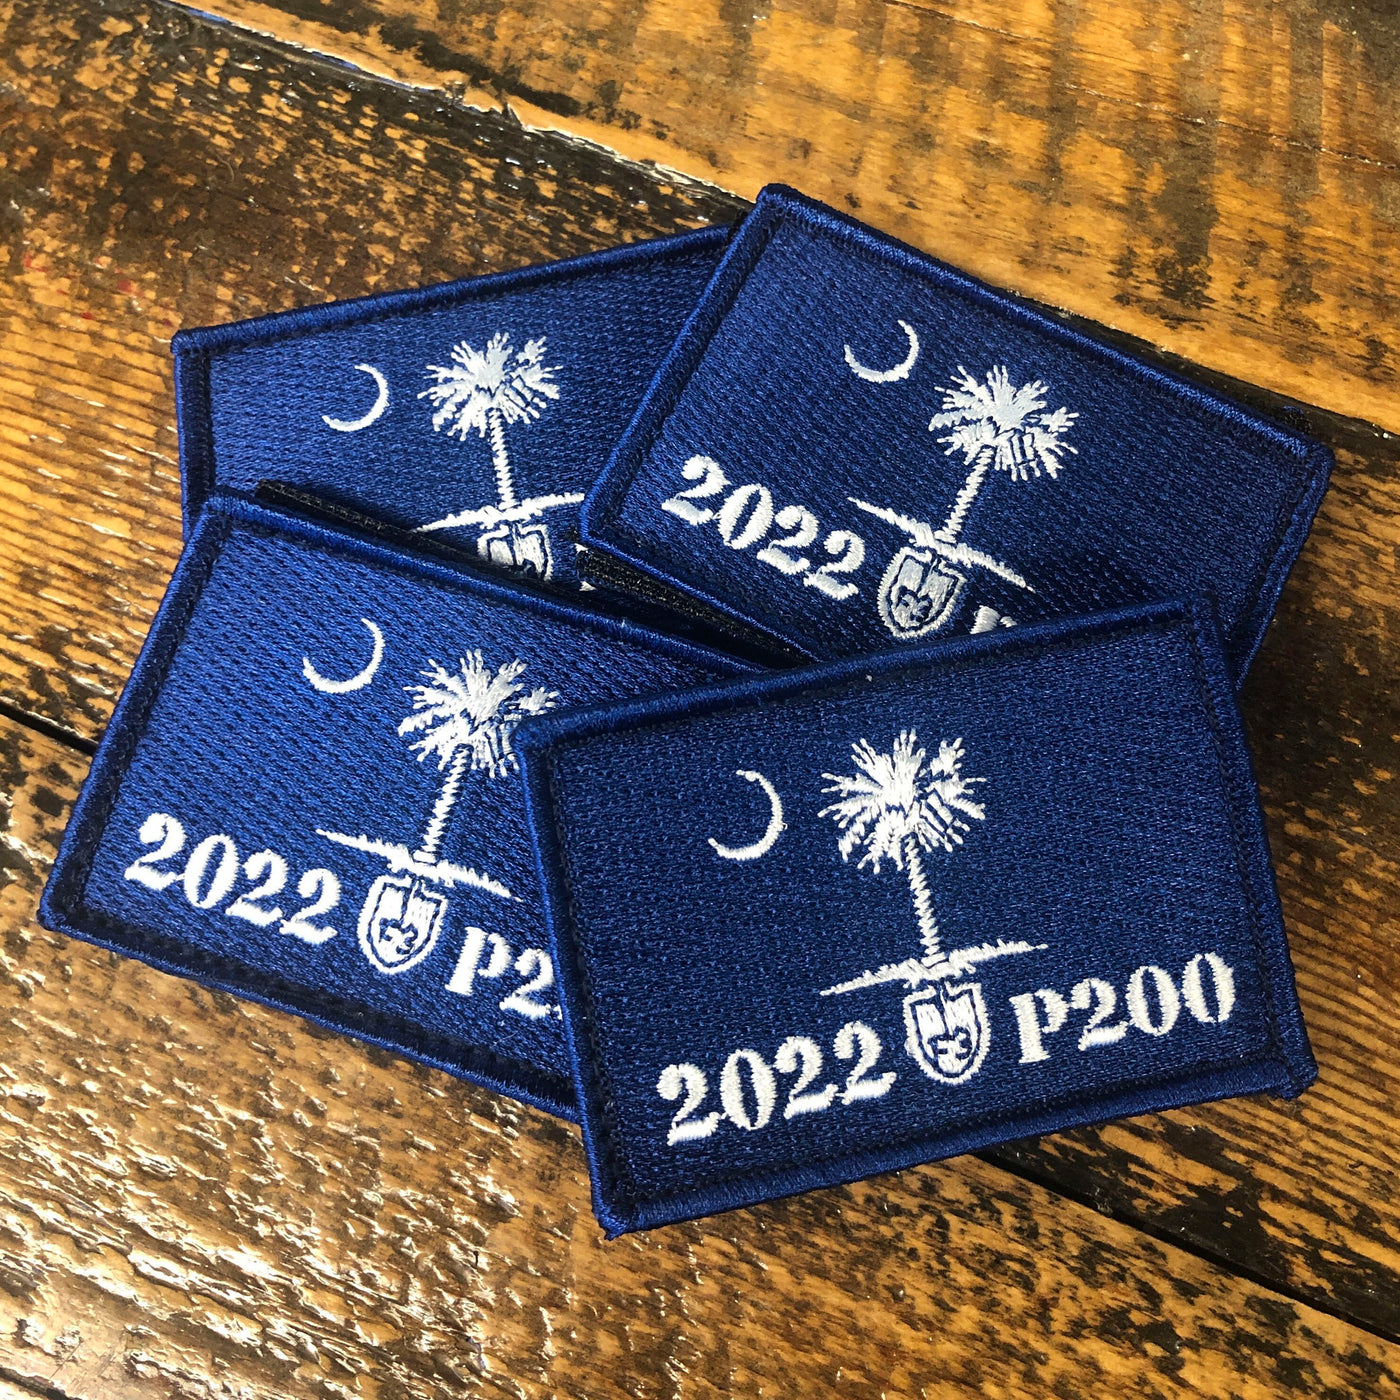 CLEARANCE ITEM - F3 2022 Palmetto 200 Patch